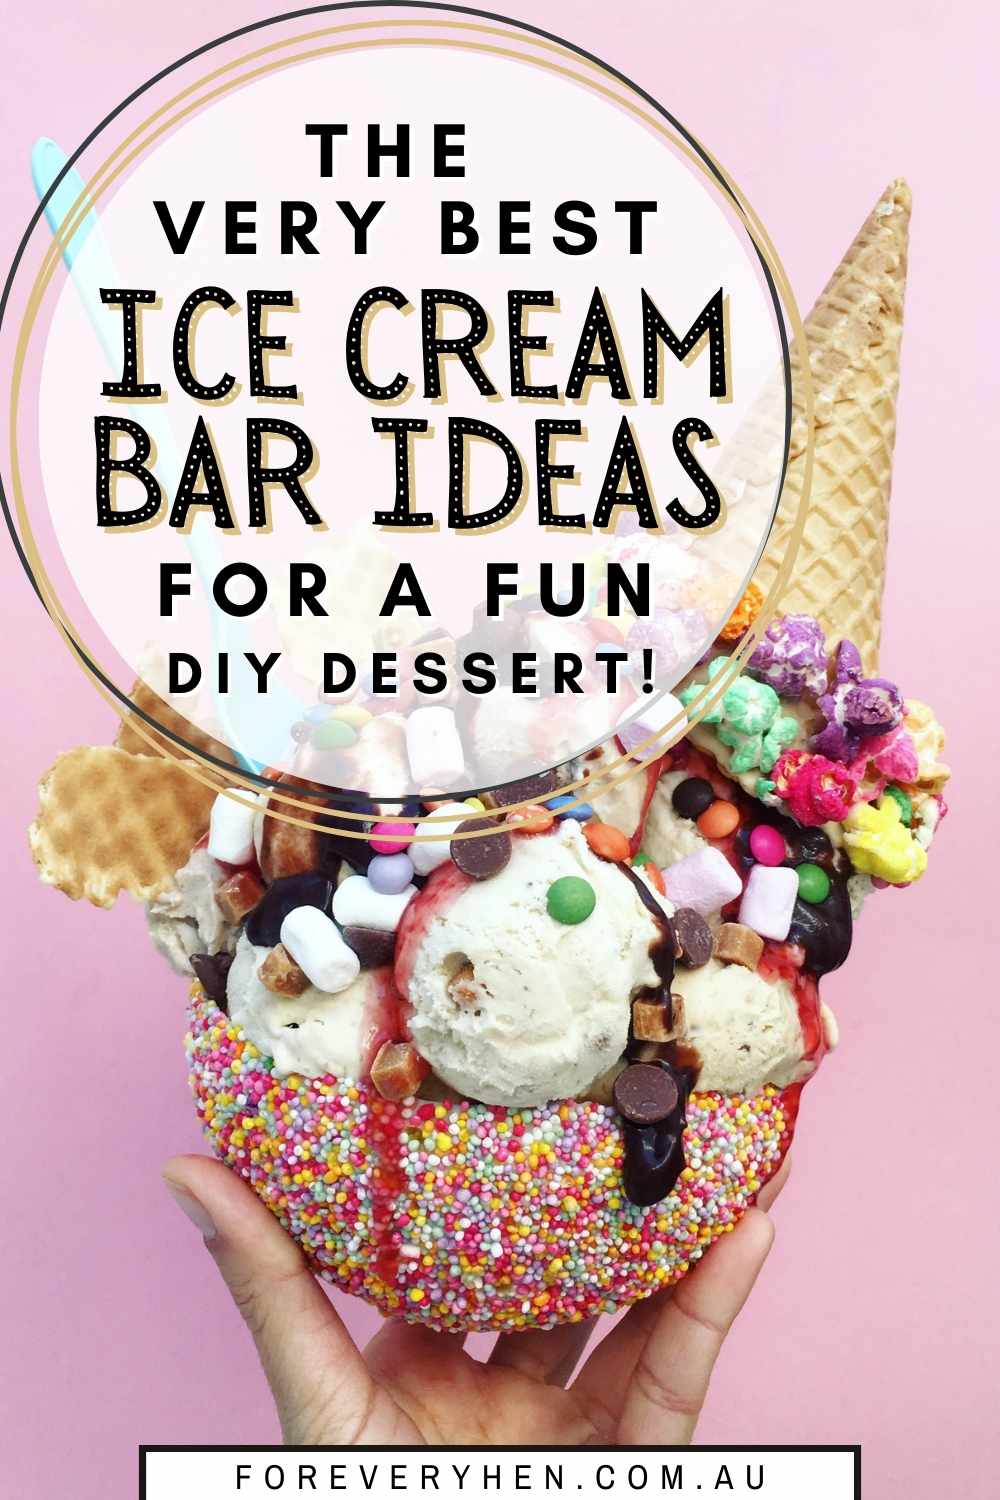 Ice cream sundae image with pink background. Text overlay: The very best ice cream bar ideas for a fun DIY dessert!